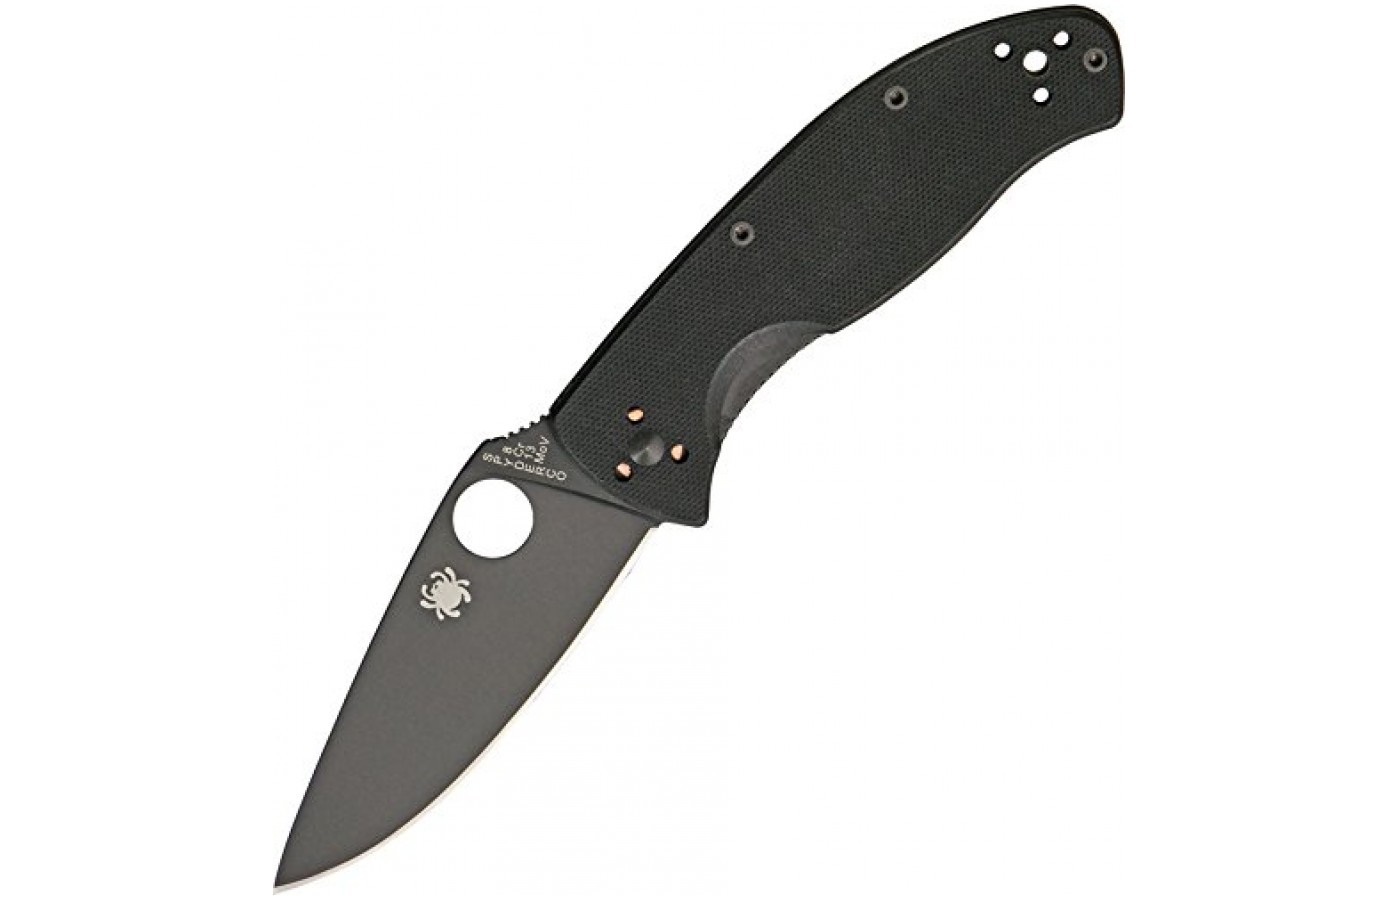 The ergonomics of the Tenacious makes for a well-designed knife with a relatively big handle.